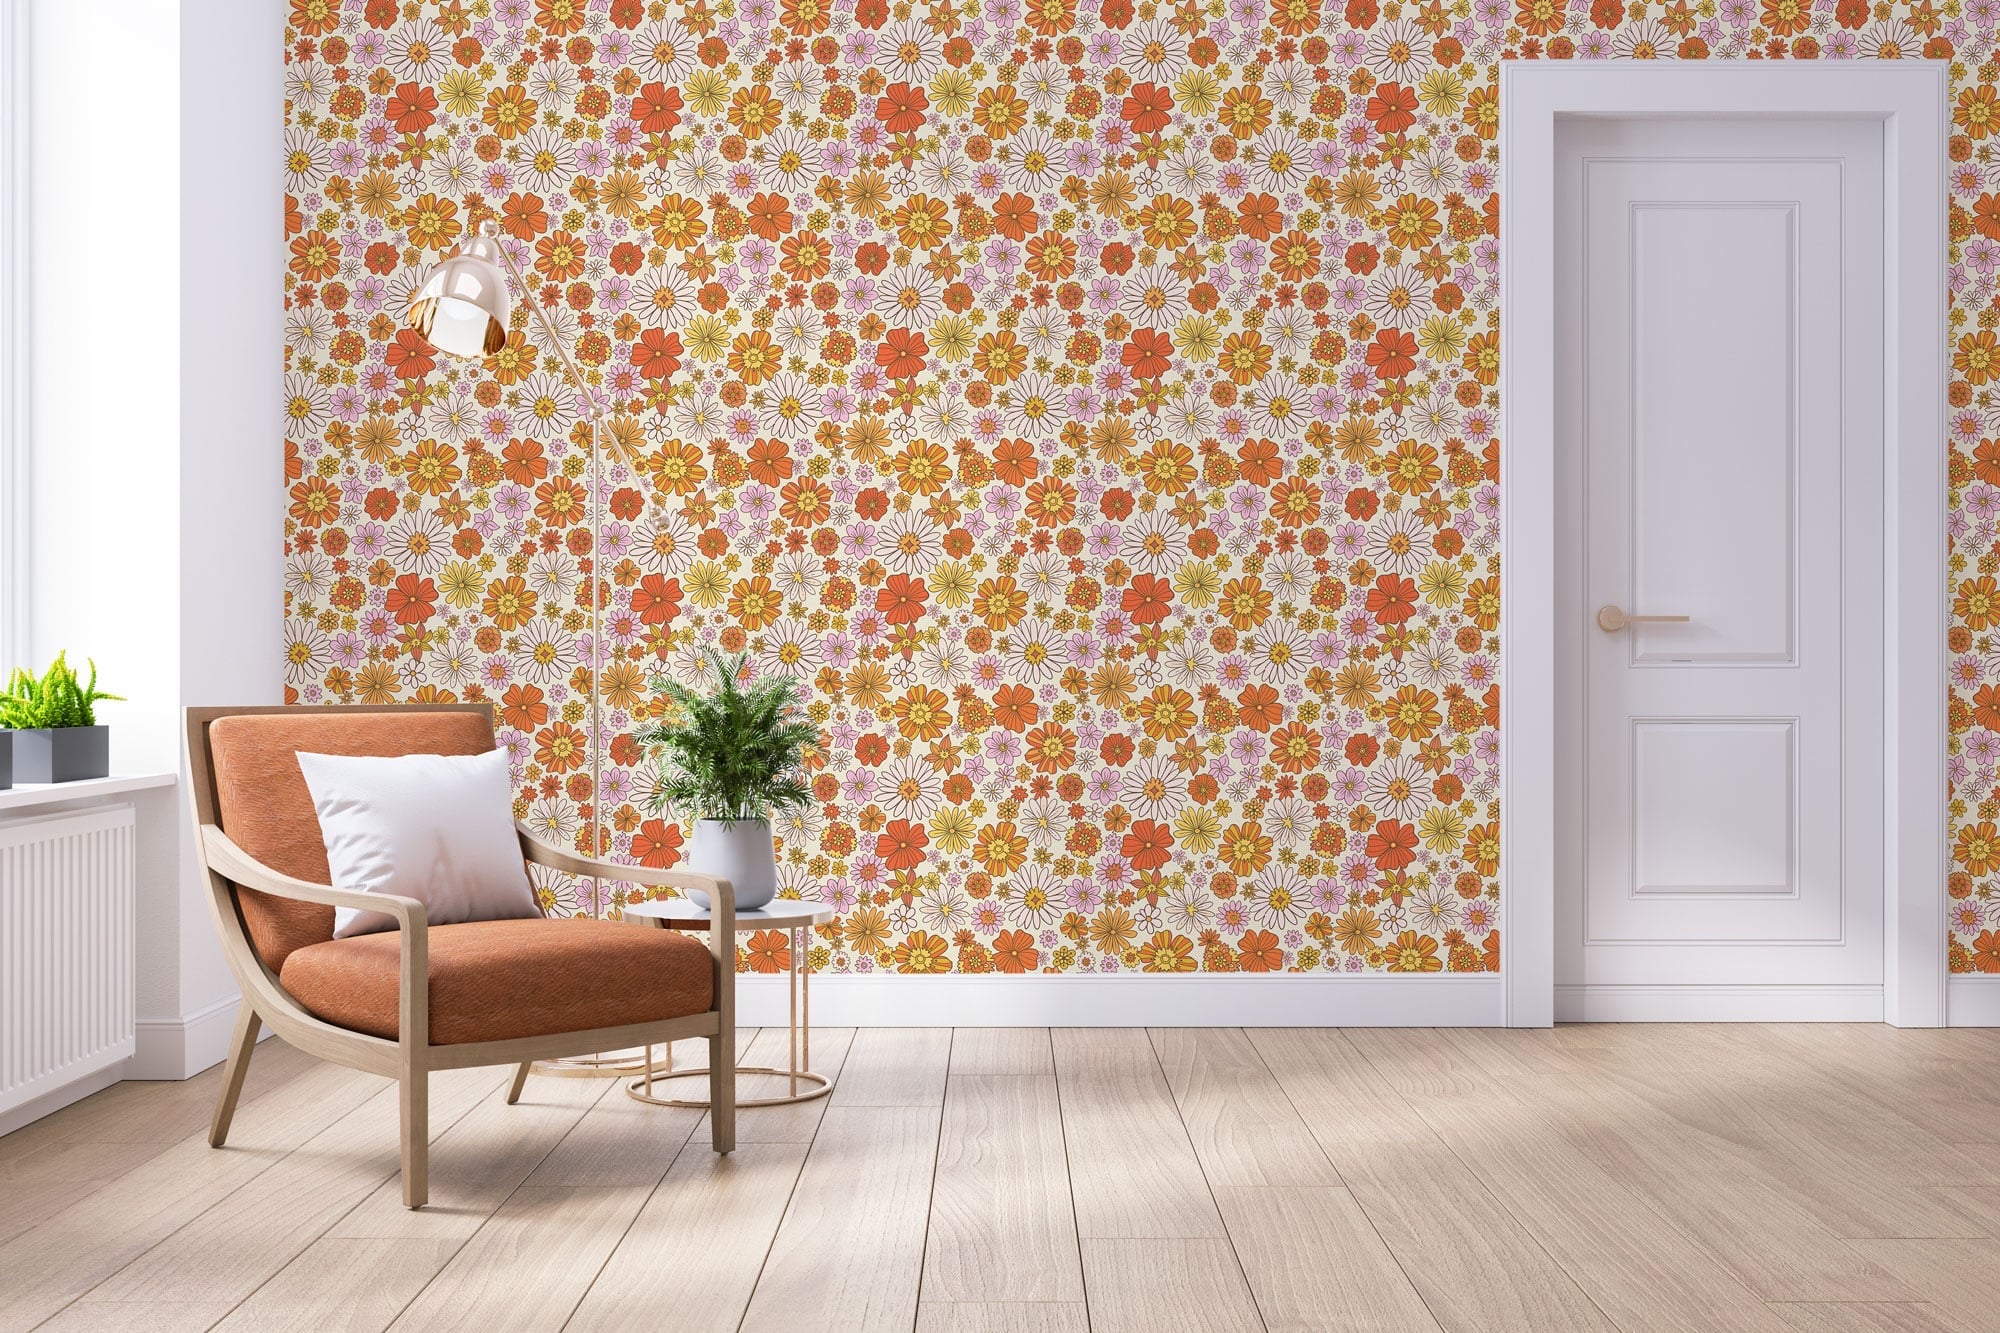 Groovy Love 70s Wallpaper and Psychedelic Art  Wallsauce AU